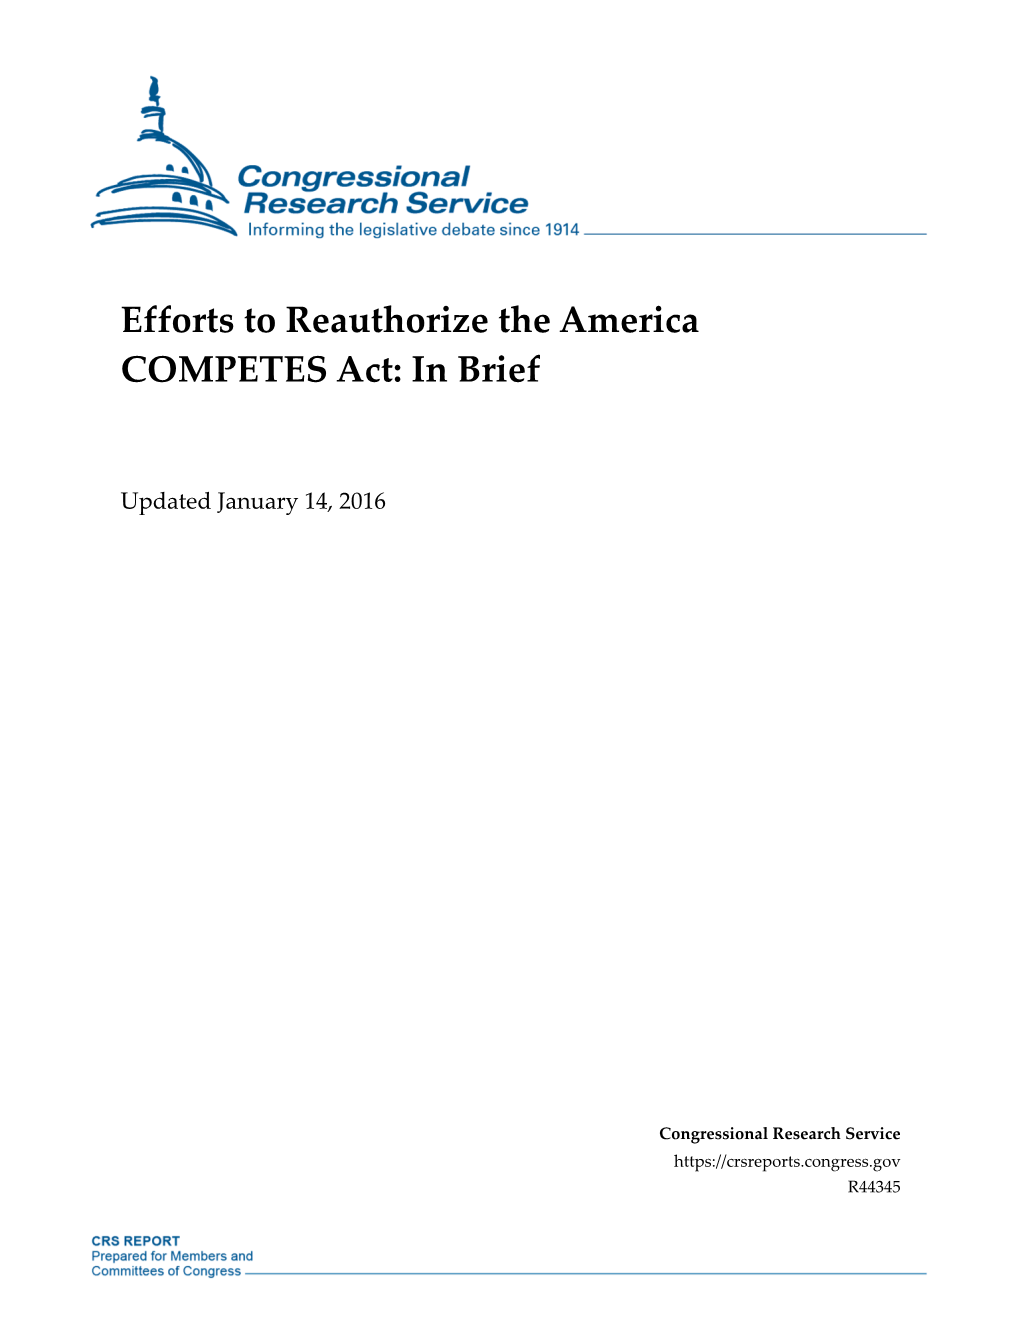 Efforts to Reauthorize the America COMPETES Act: in Brief